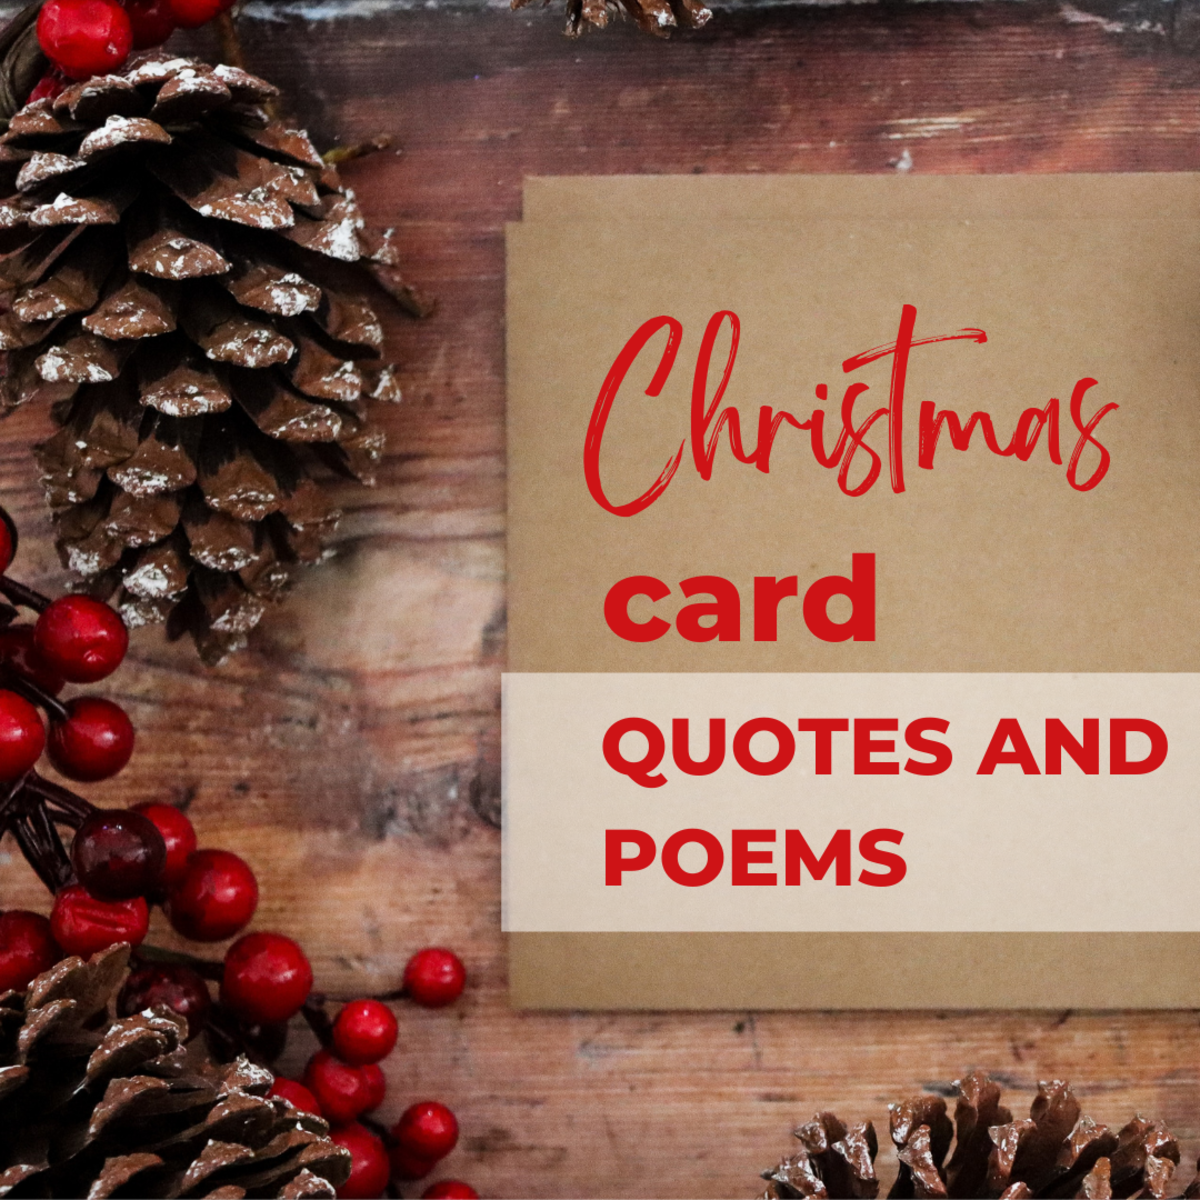 Christmas Poems, Verses, and One-Liners to Write in a Card